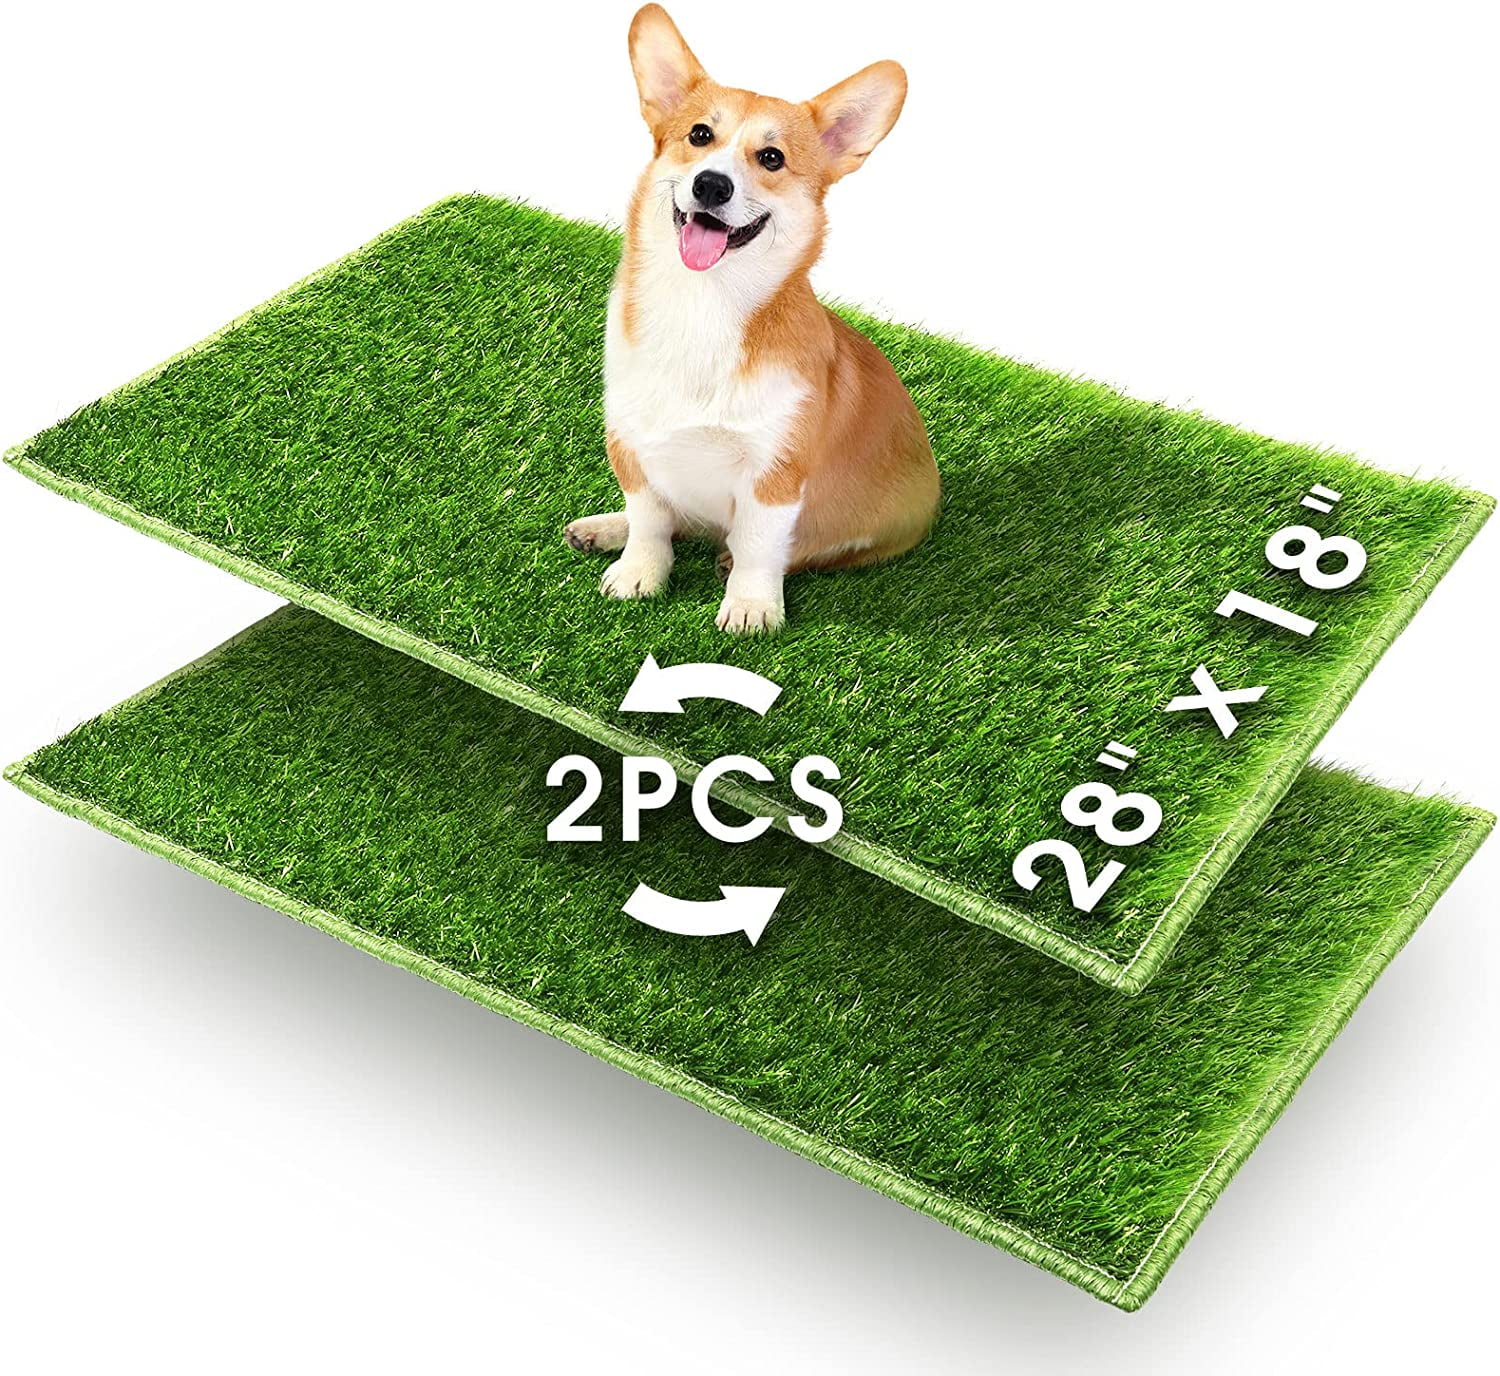 Bethebstyo Artificial Grass, Dog Pee Pads, Professional Dog Potty Training  Rug, Large Dog Grass Mat with Drainage Holes, Pet Turf Indoor Outdoor